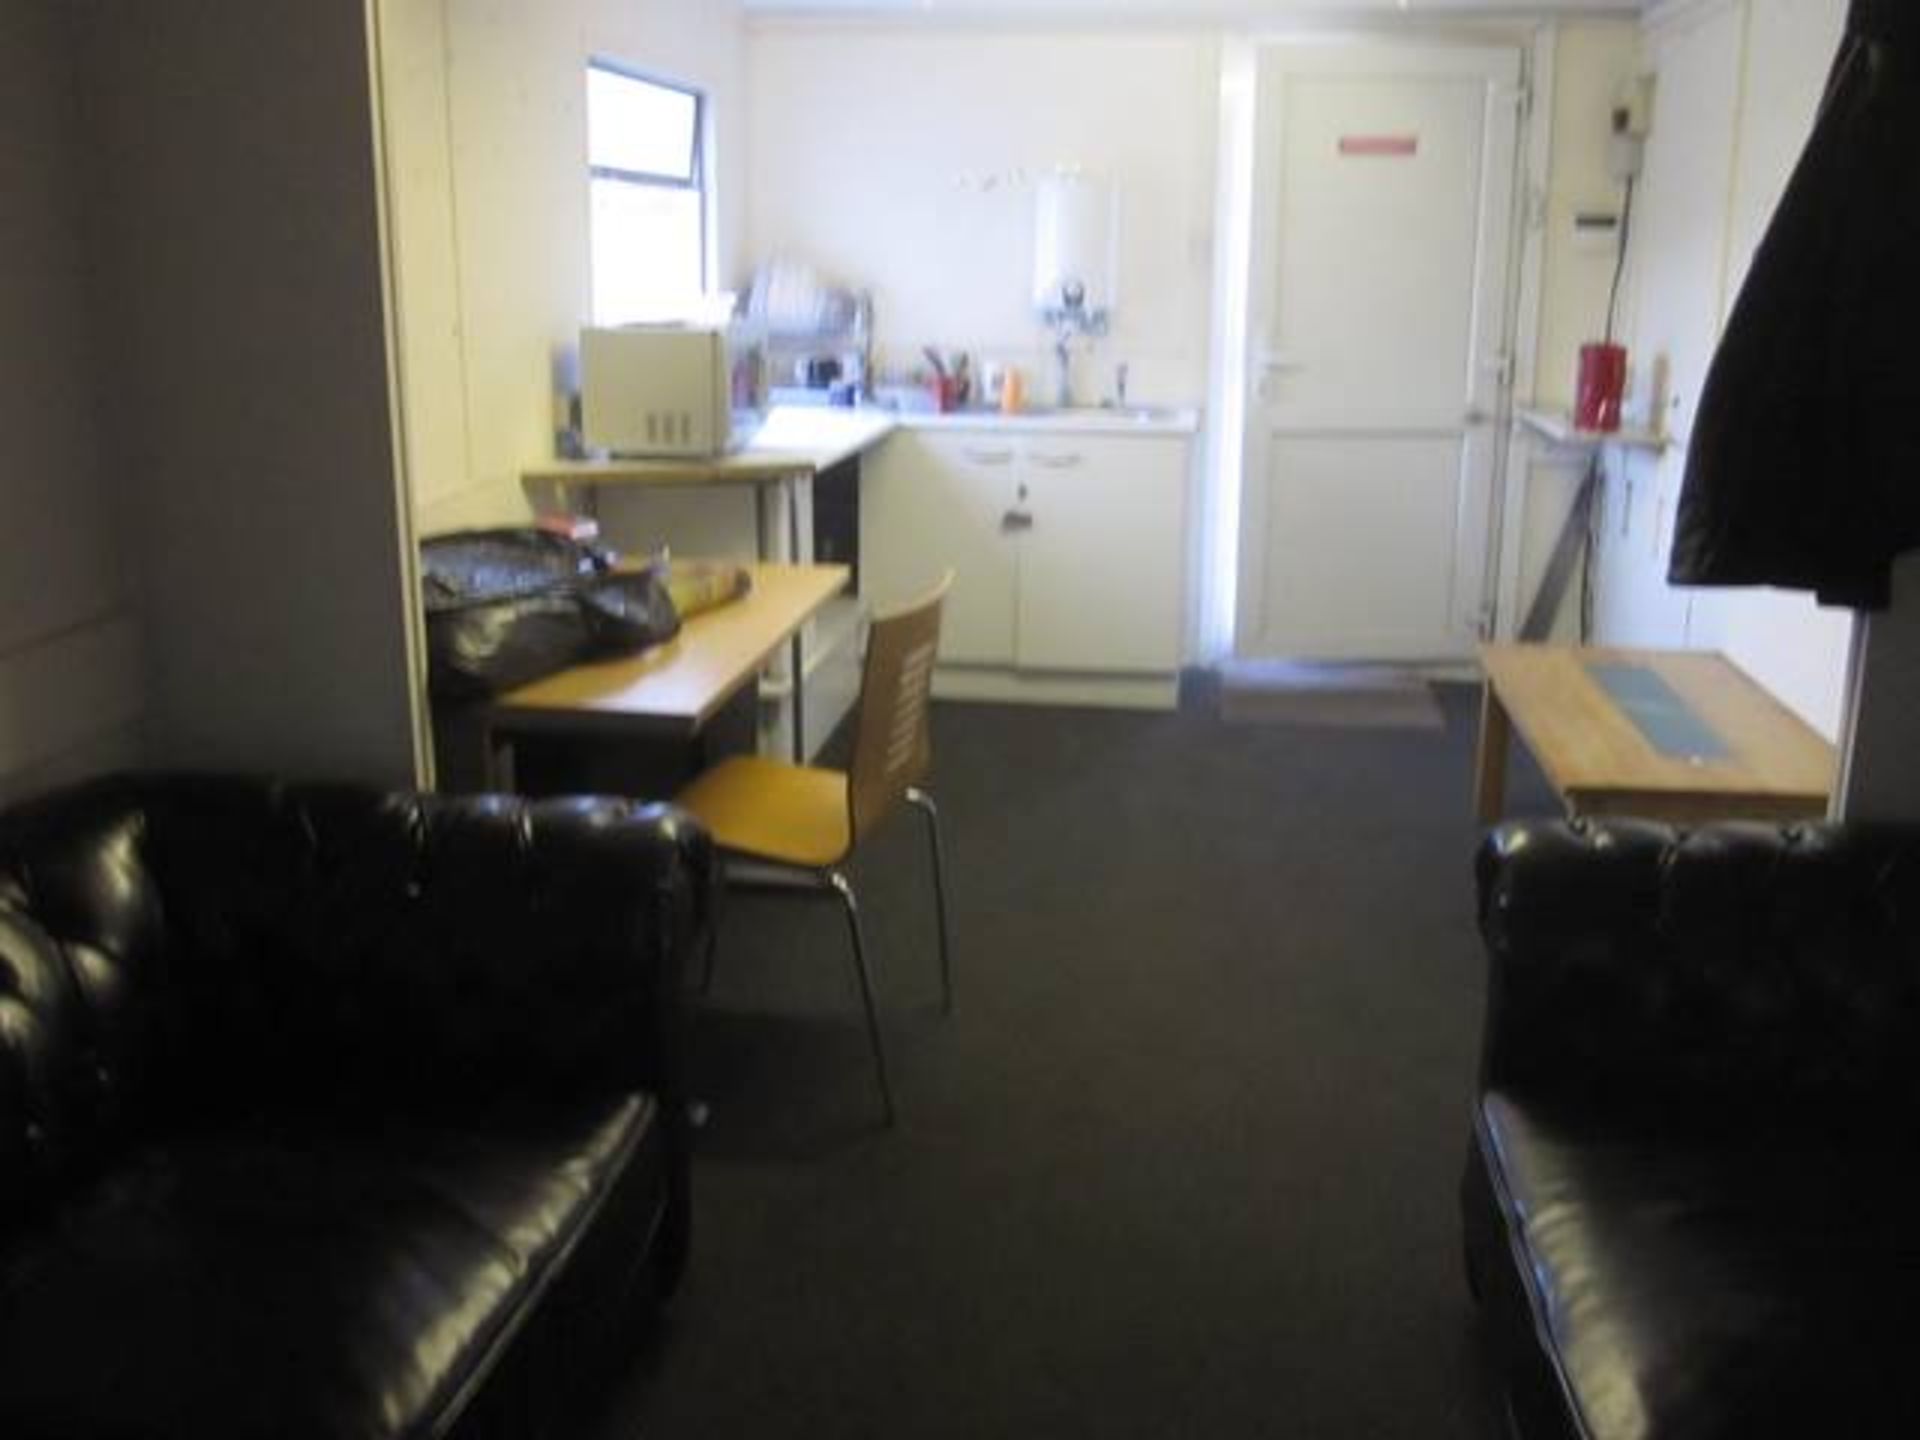 PortaKabin jackleg portacabin /office accomodation, approx 7m length, fitted kitchen area, - Image 4 of 4